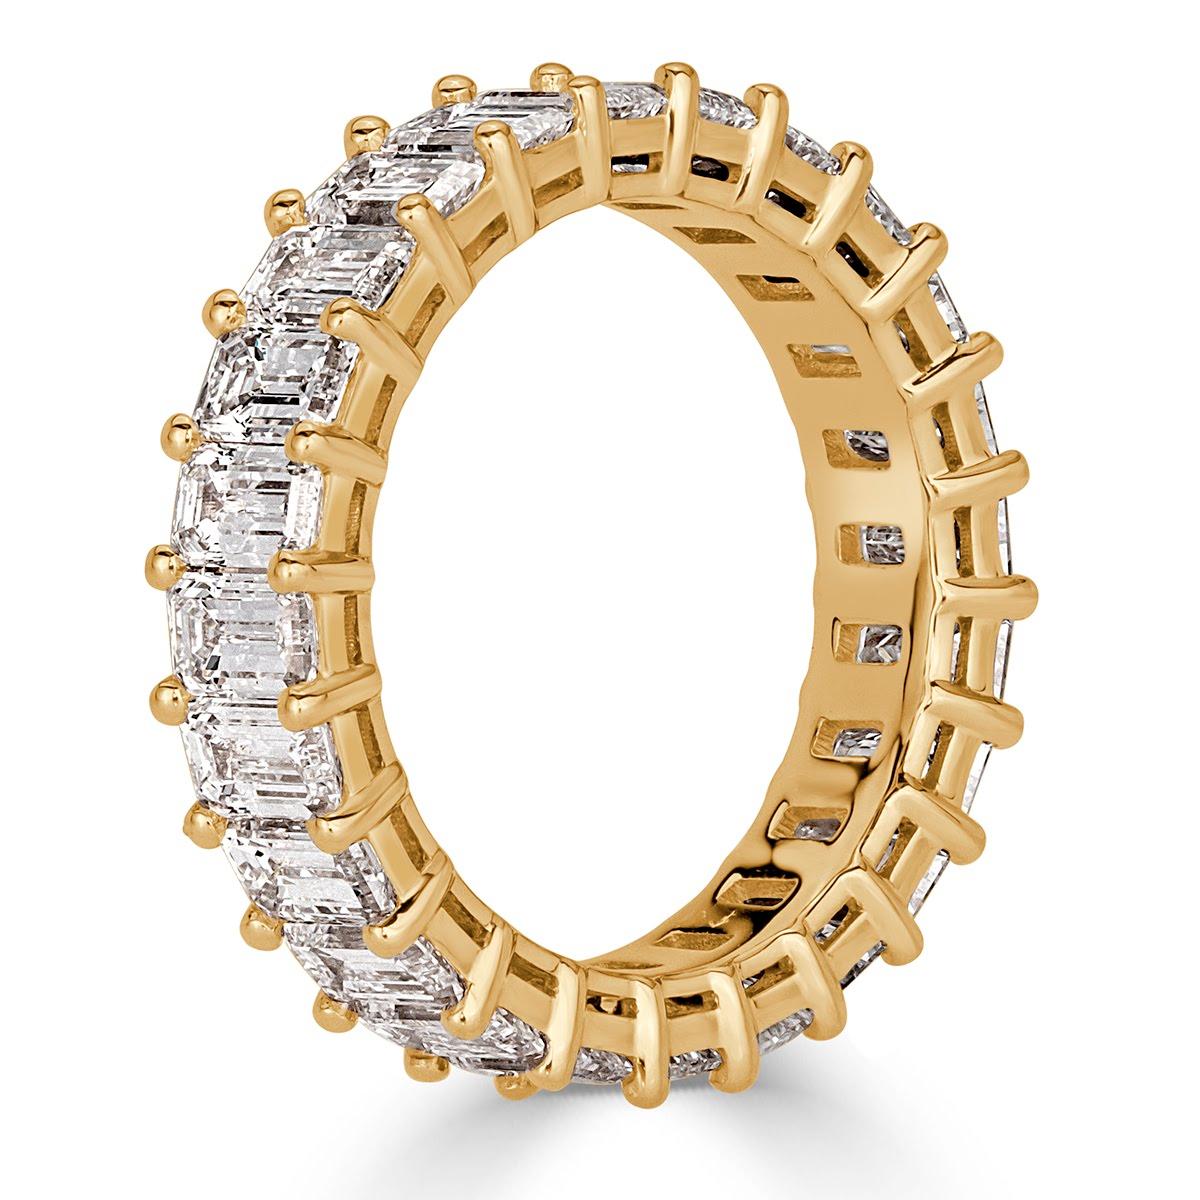 Handcrafted in 18k yellow gold, this captivating emerald cut diamond eternity band showcases 4.87ct of perfectly matched emerald cut diamonds graded at E-F colors, VVS2-VS1 clarities. All eternity bands are shown in a size 6.5. We custom craft each